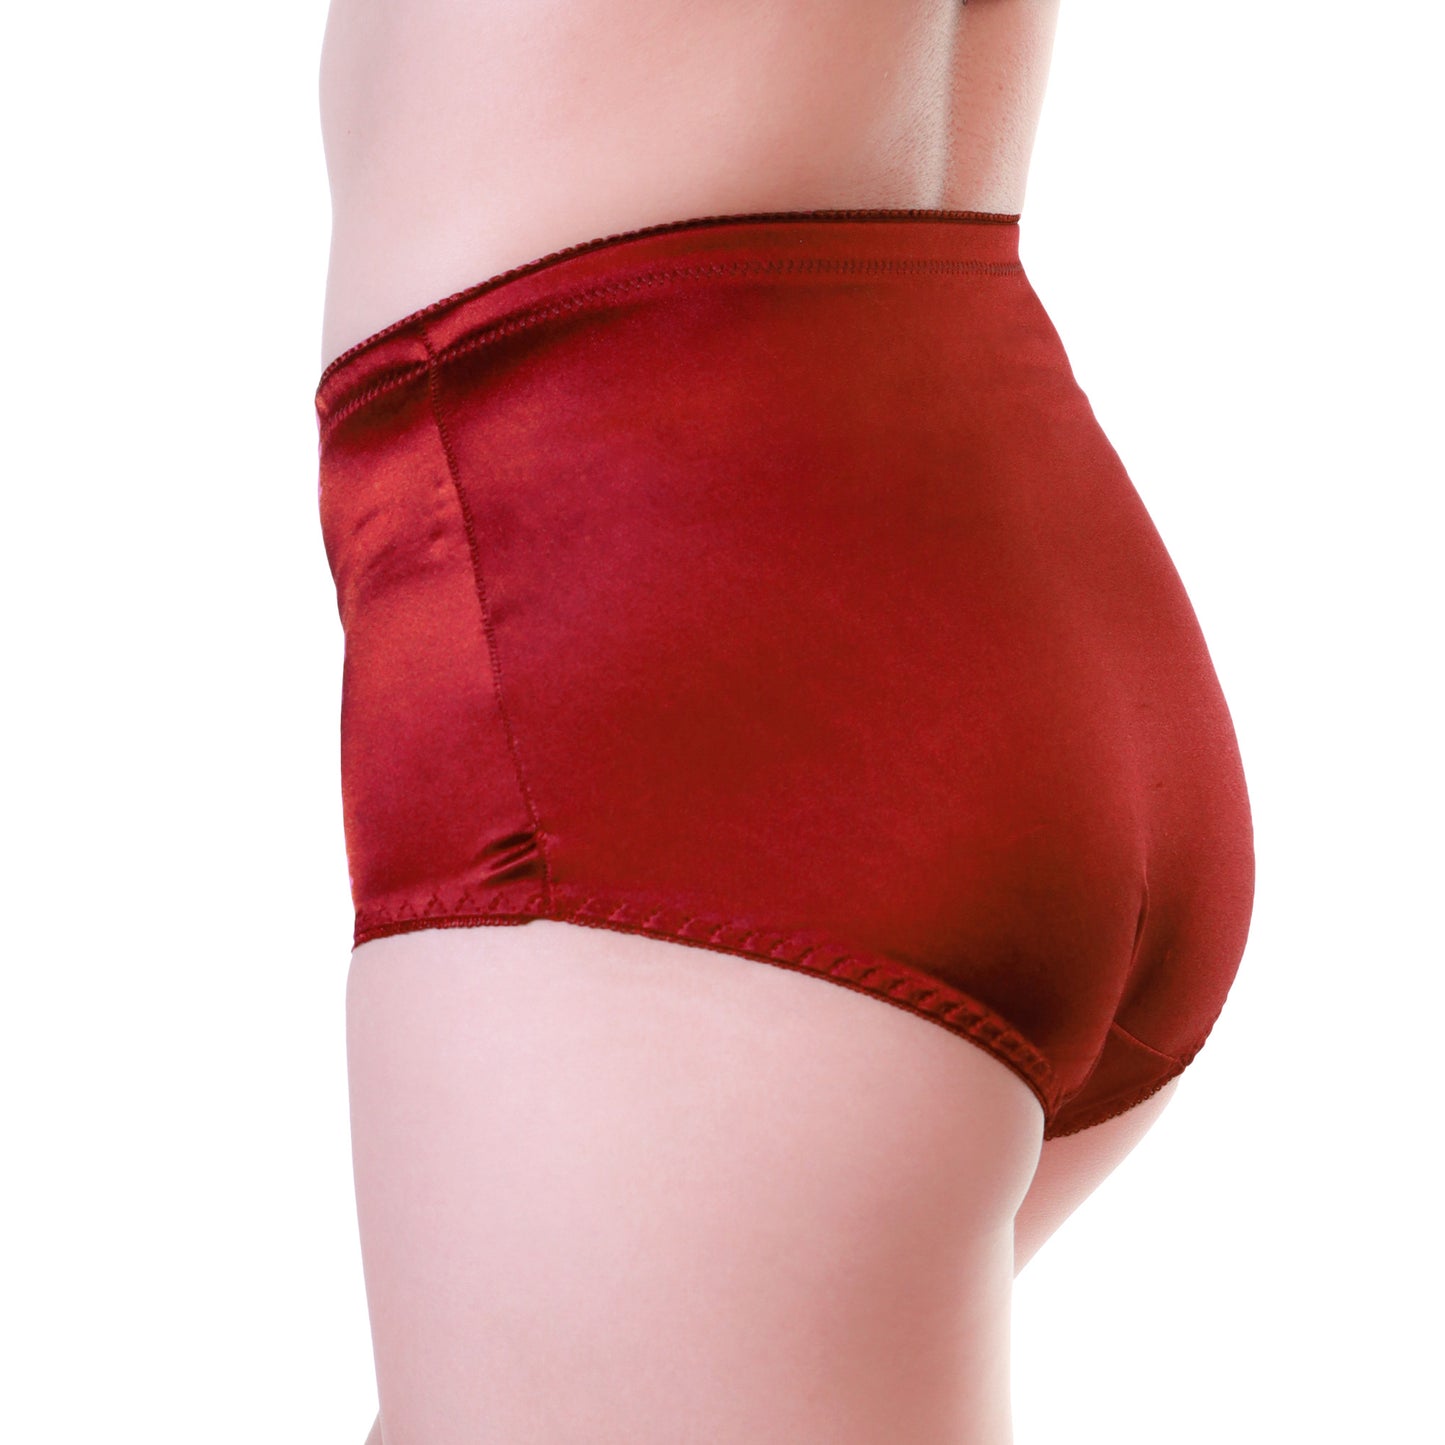 Angelina Classic High-Waist Satin Briefs with Pocket (12-Pack), #4920